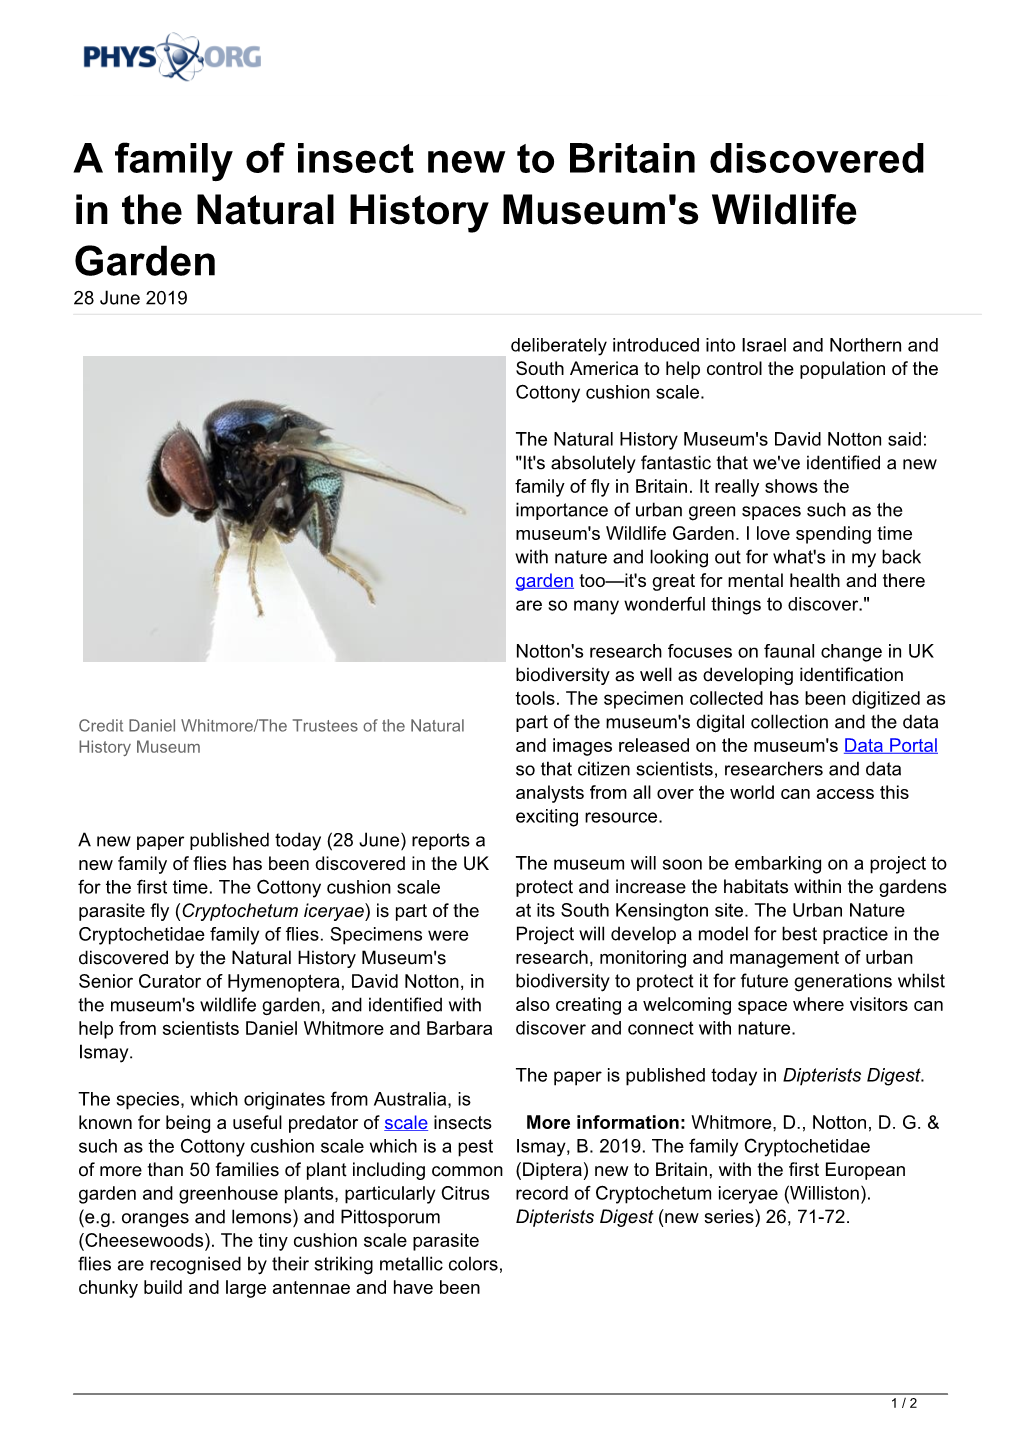 A Family of Insect New to Britain Discovered in the Natural History Museum's Wildlife Garden 28 June 2019